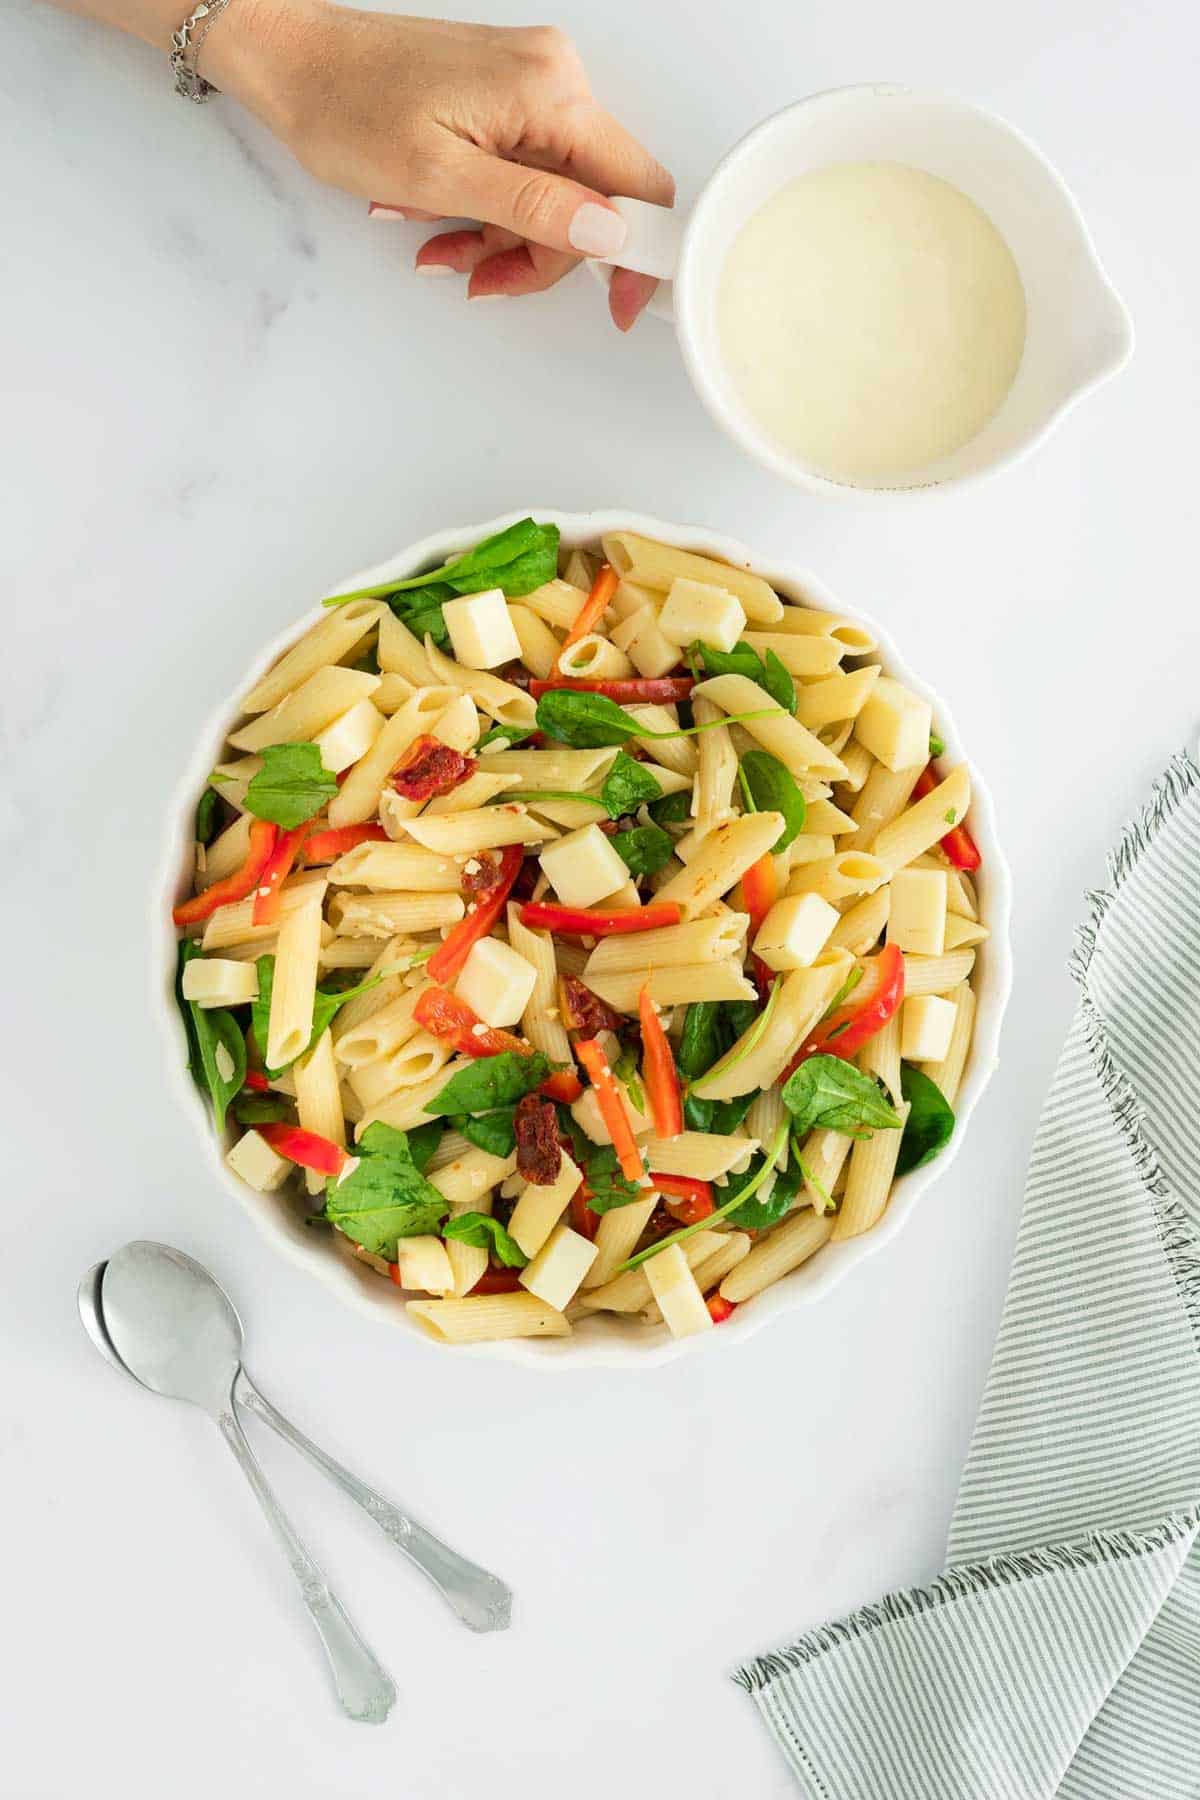 A bowl of pasta salad with vegetables and a hand holding a dressing jar.